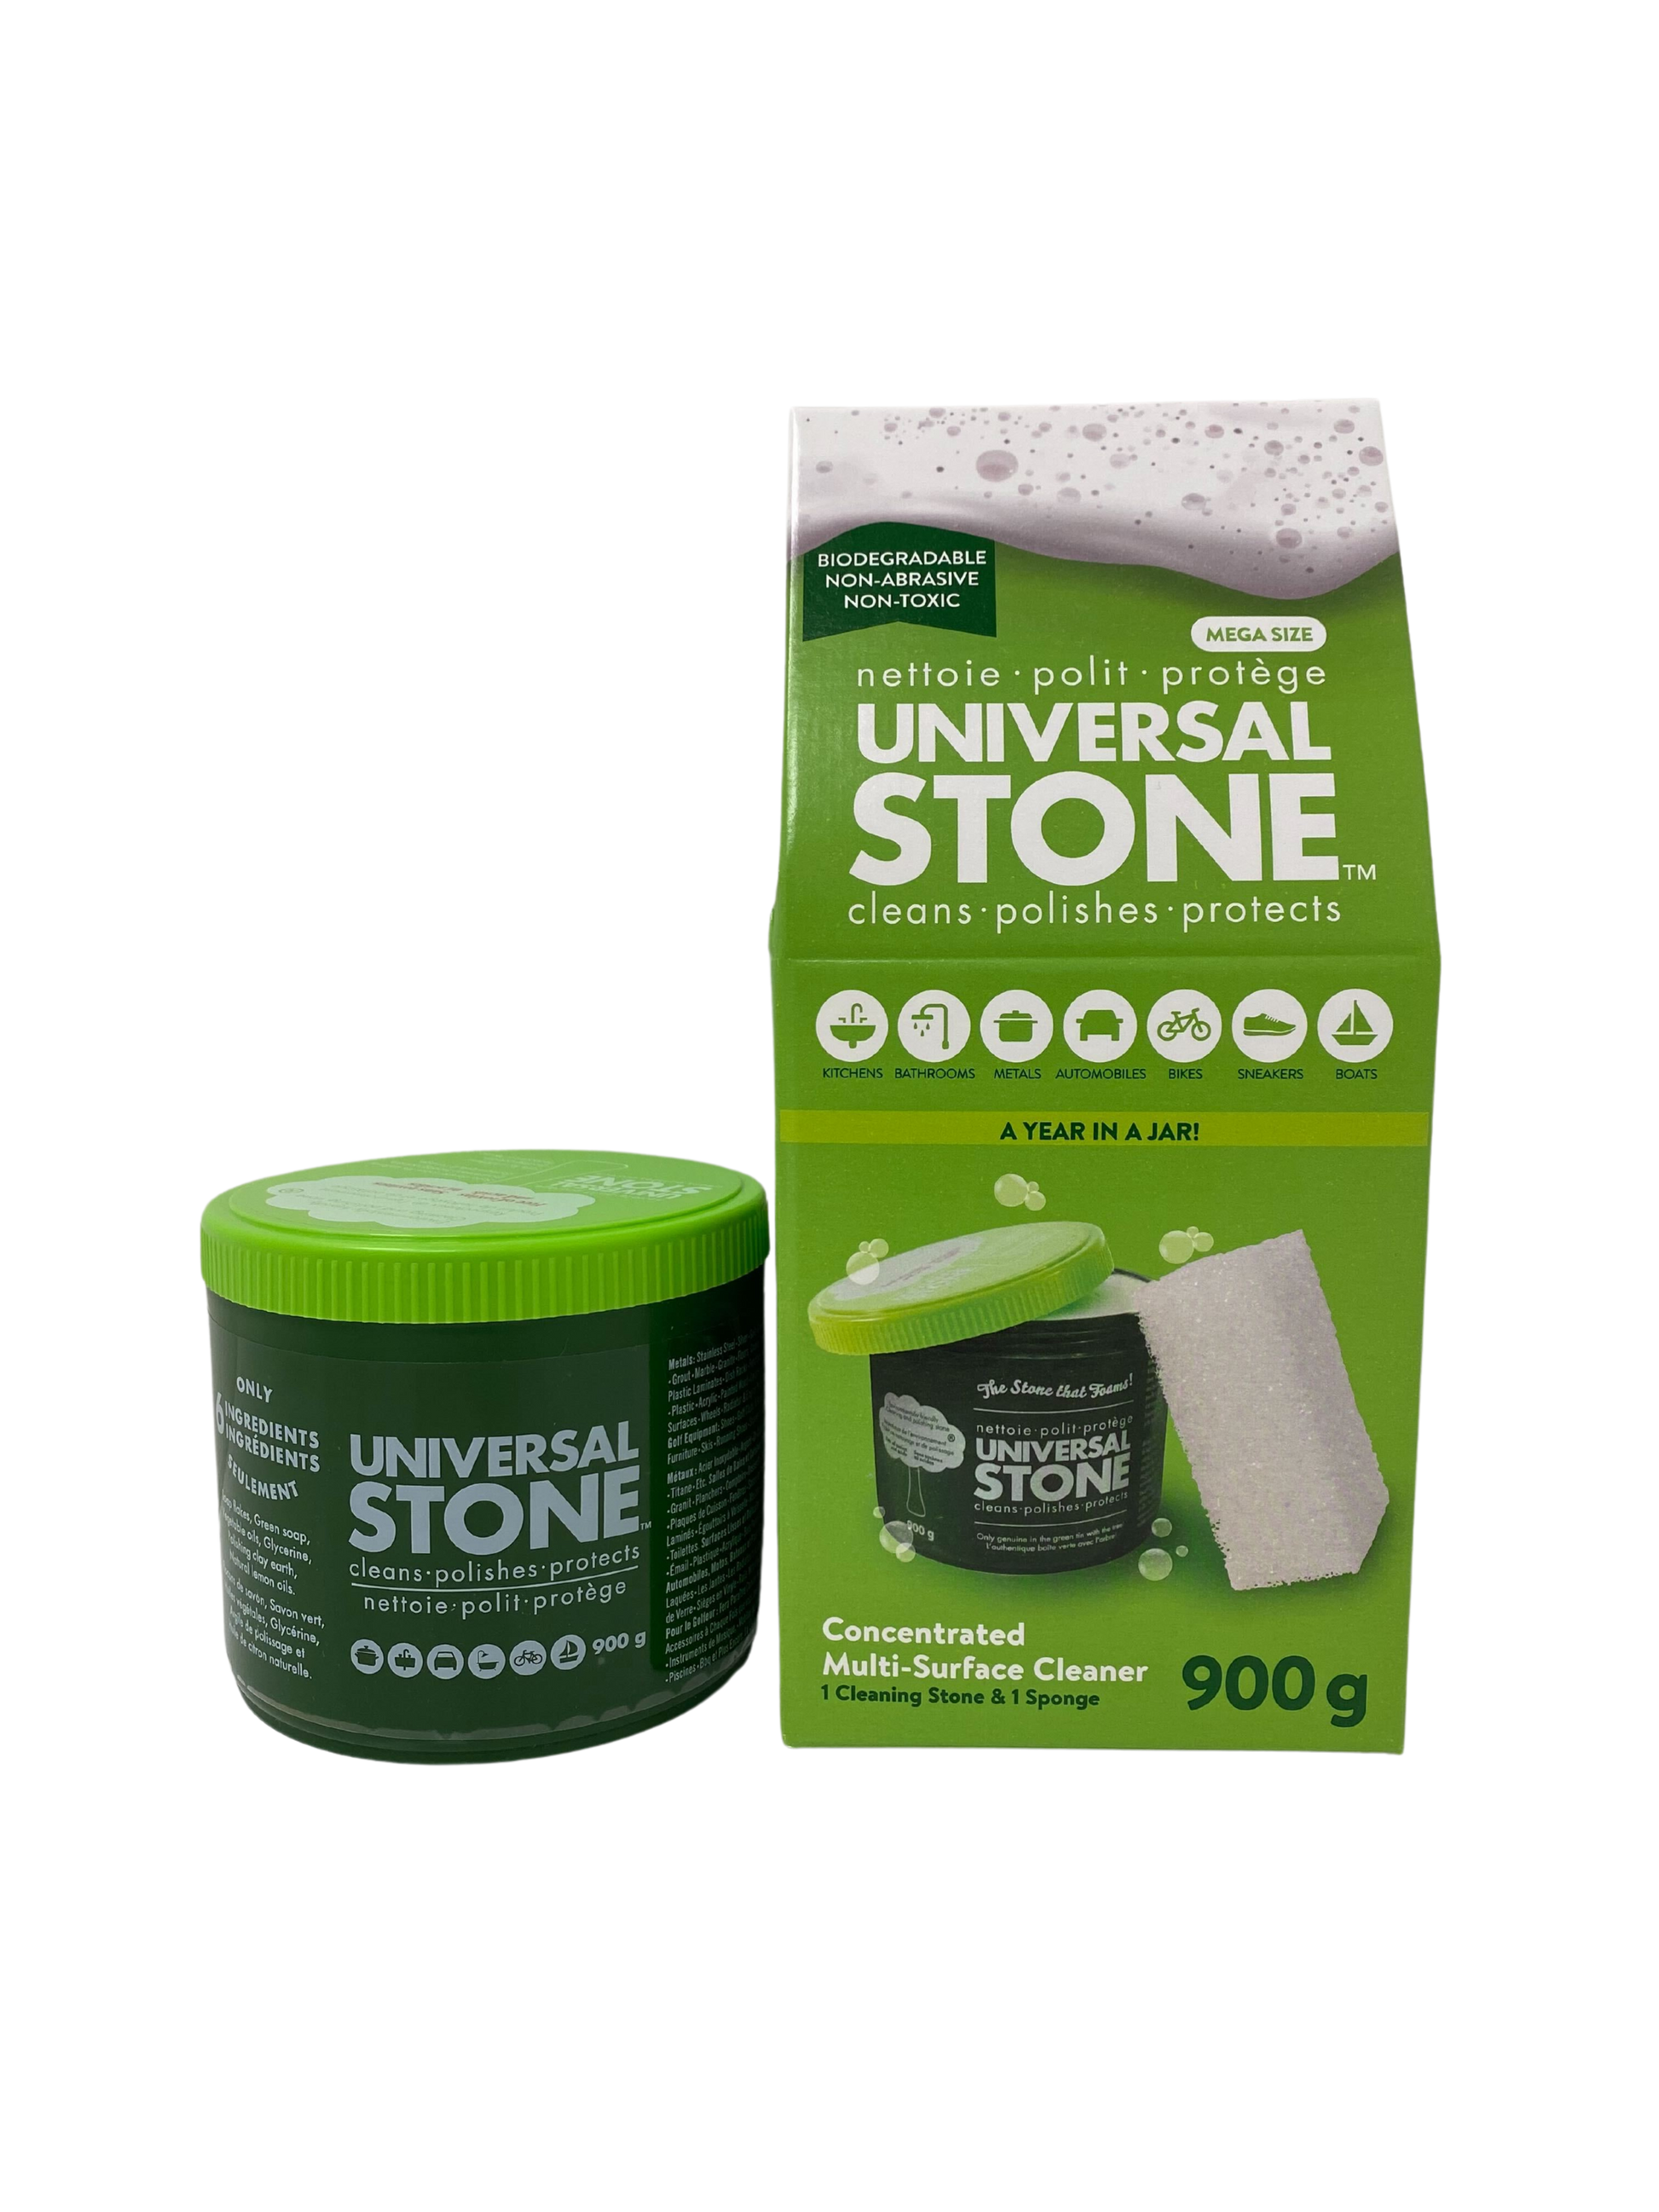  Universal Stone - The All-Purpose Stone That Foams, Cleans,  Polishes and Protects. Sponge Included. Eco Friendly and Biodegradable  (650g) : Health & Household